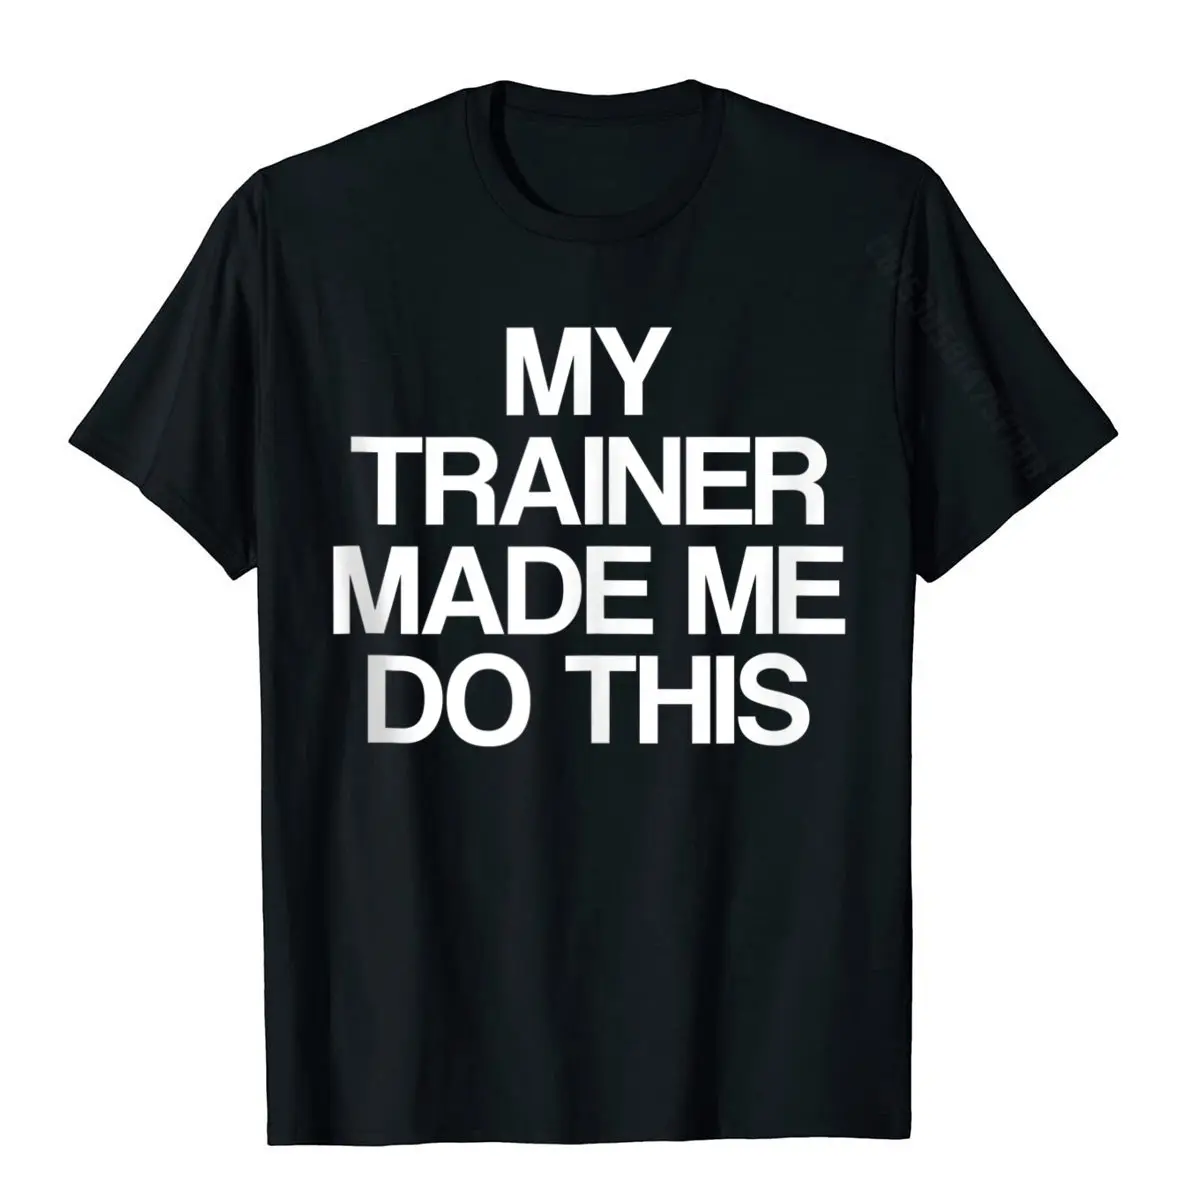 My Trainer Made Me Do This | Funny Gym Workout Saying Basic Top Men Faddish Printed Tops & Tees Cotton T Shirt 3D Printed